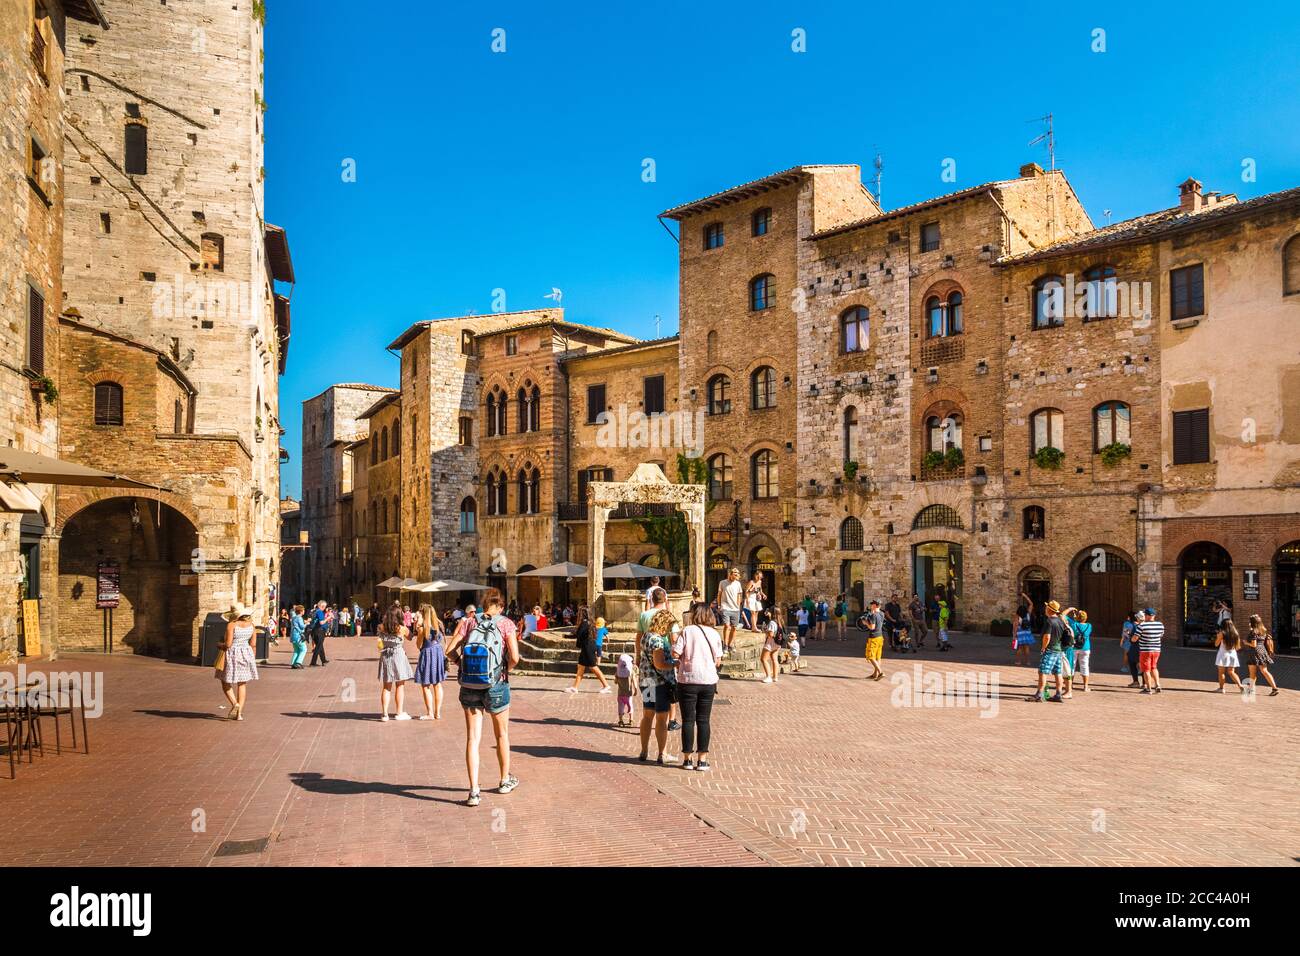 Gorgeous view of the Piazza della Cisterna, main square of San Gimignano in Tuscany. Named after the underground cistern, capped by an octagonal... Stock Photo